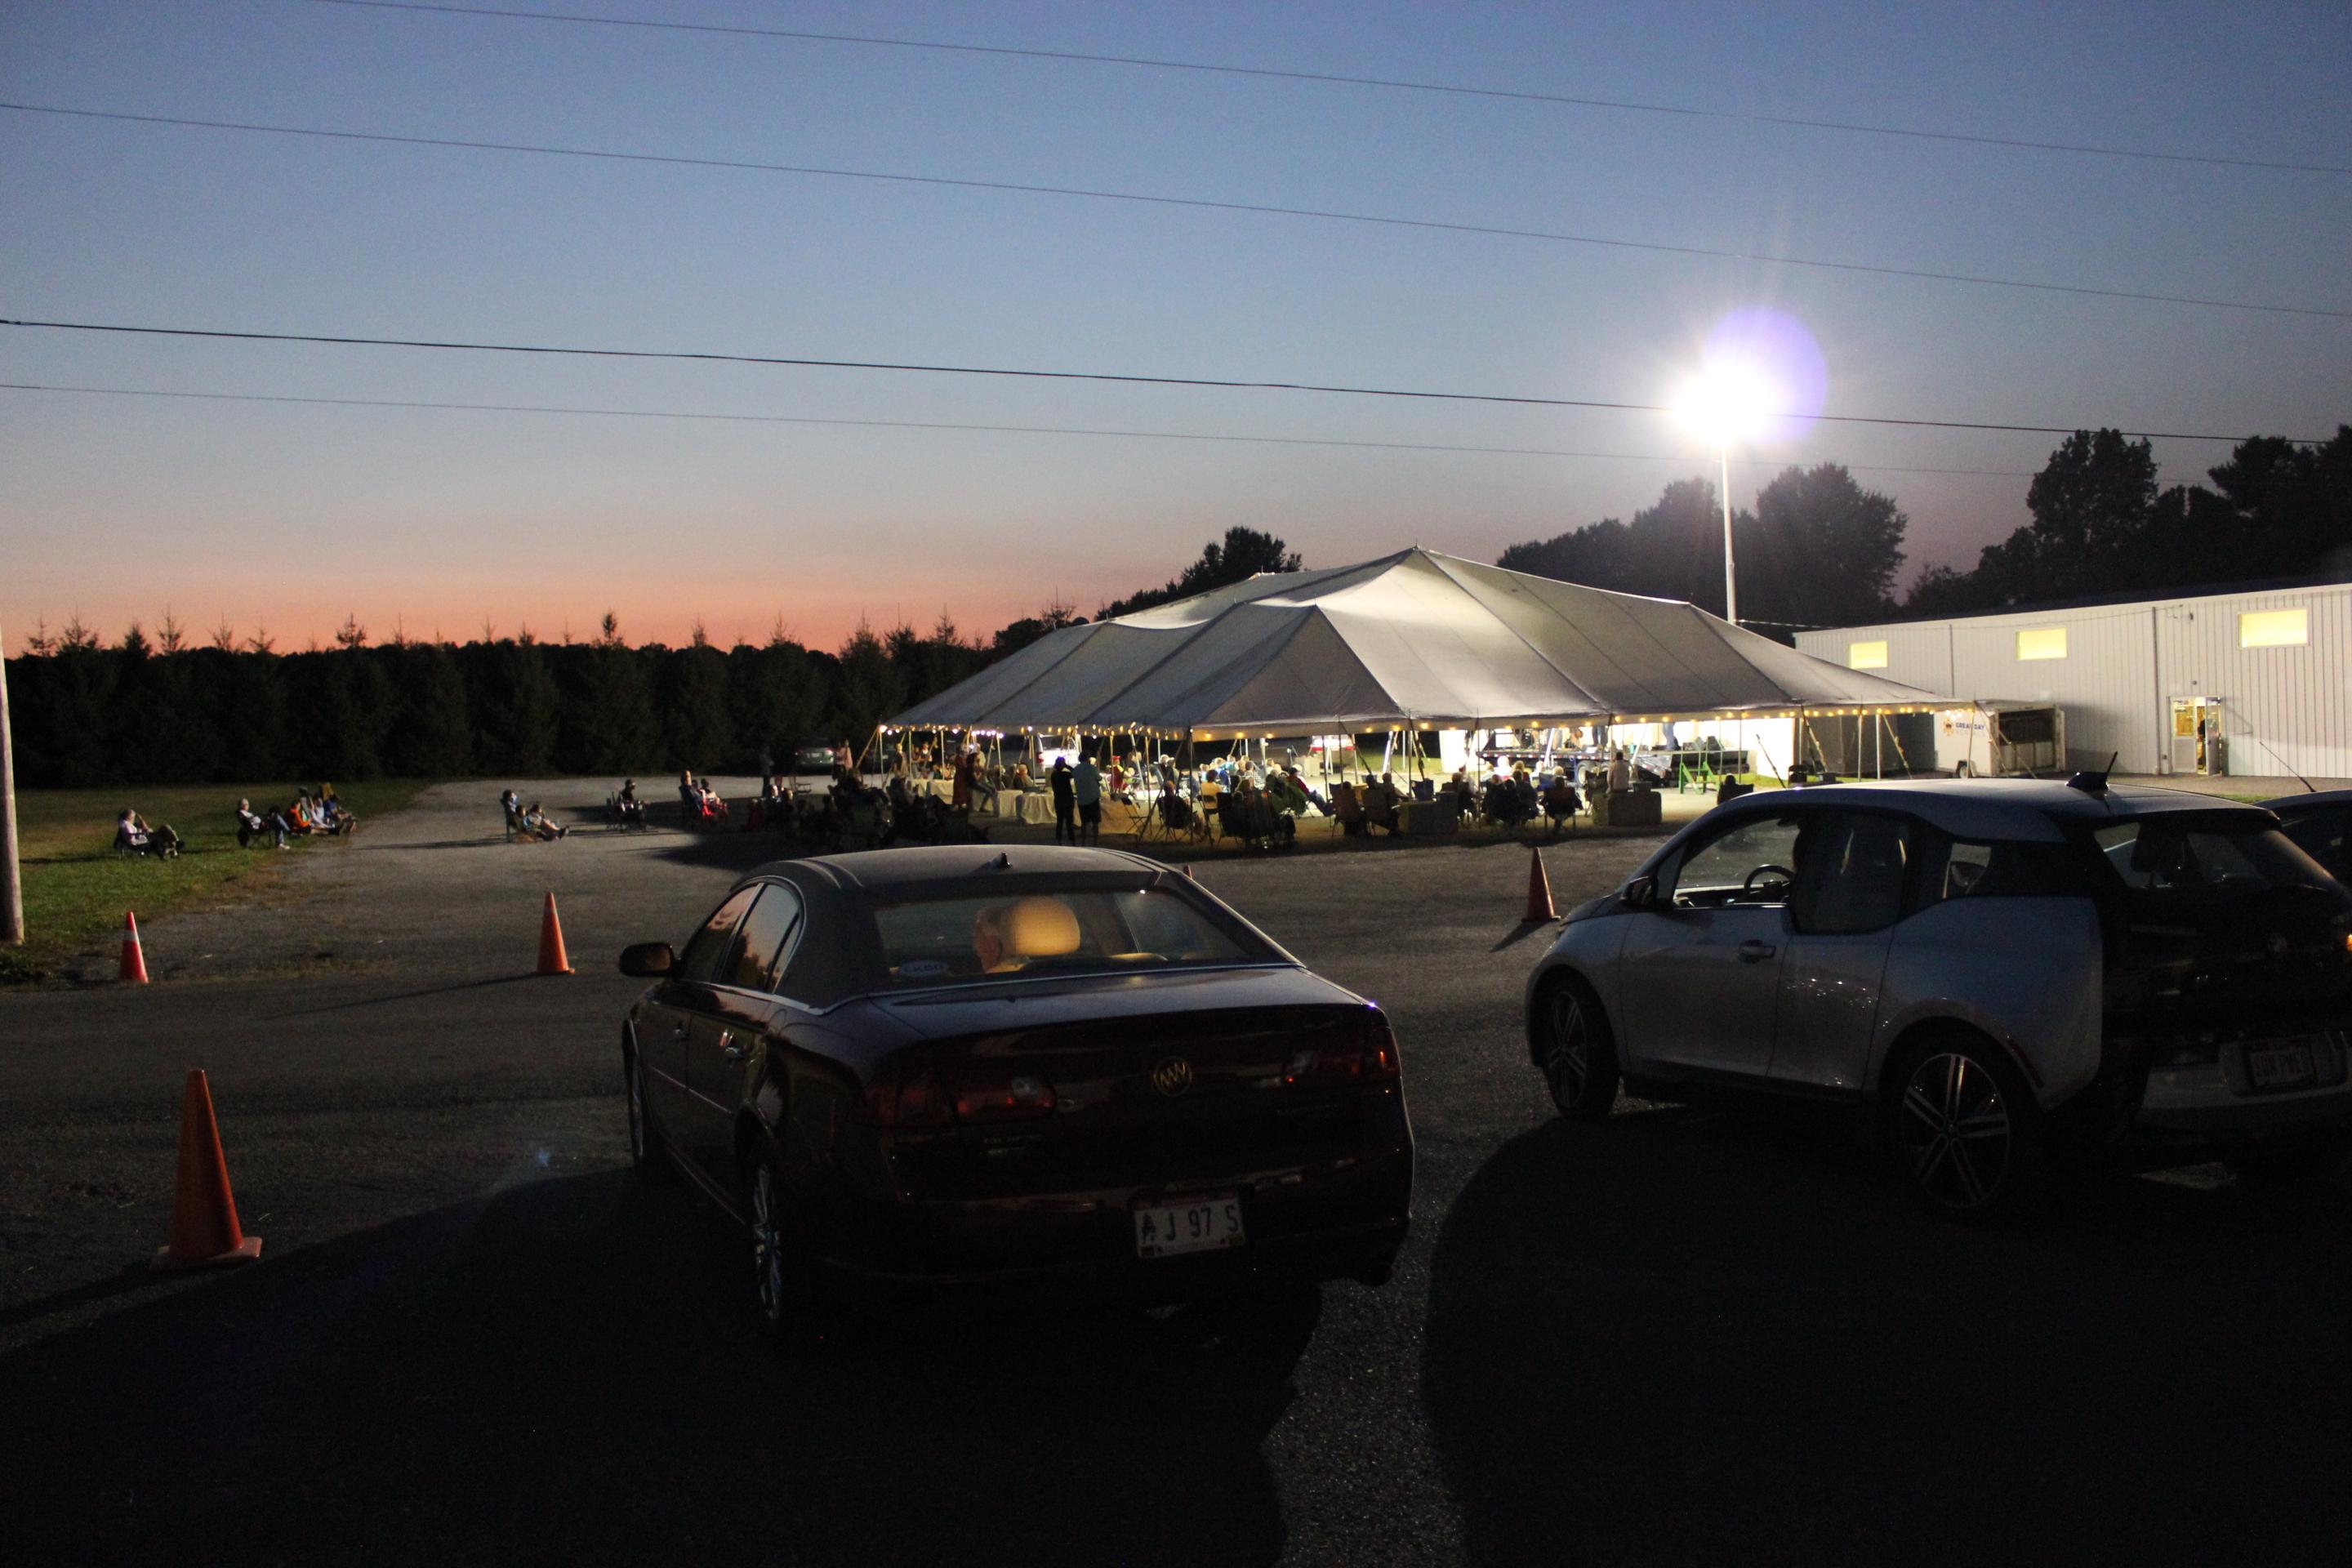 Cars parked outside of a large tent at sundown